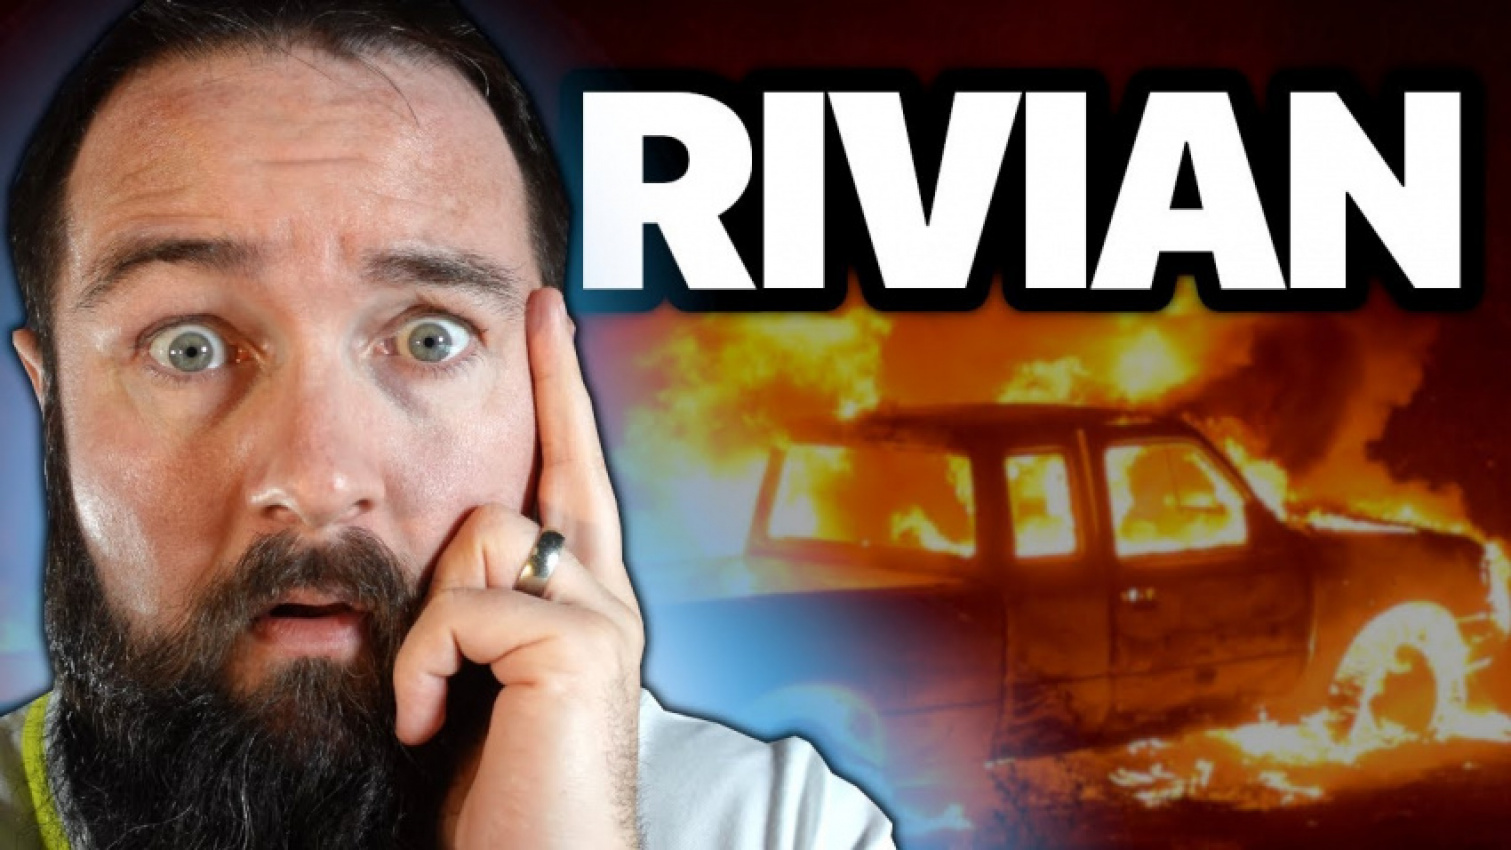 auto, autos, cars, rivian, ev stocks, how to buy rivian stock, investing, rivian ipo, rivian ipo stock price, rivian review, rivian stock, rivian stock analysis, rivian stock forecast, rivian stock how to buy, rivian stock ipo, rivian stock ipo date, rivian stock news, rivian stock predictions, rivian stock price, rivian stock price prediction, rivian truck stock, rivian vs tesla, rivn, rivn stock, should i buy rivian stock, stock market, stocks to buy, stocks to buy now, tesla stock, rivian stock  – huge problem with rivn